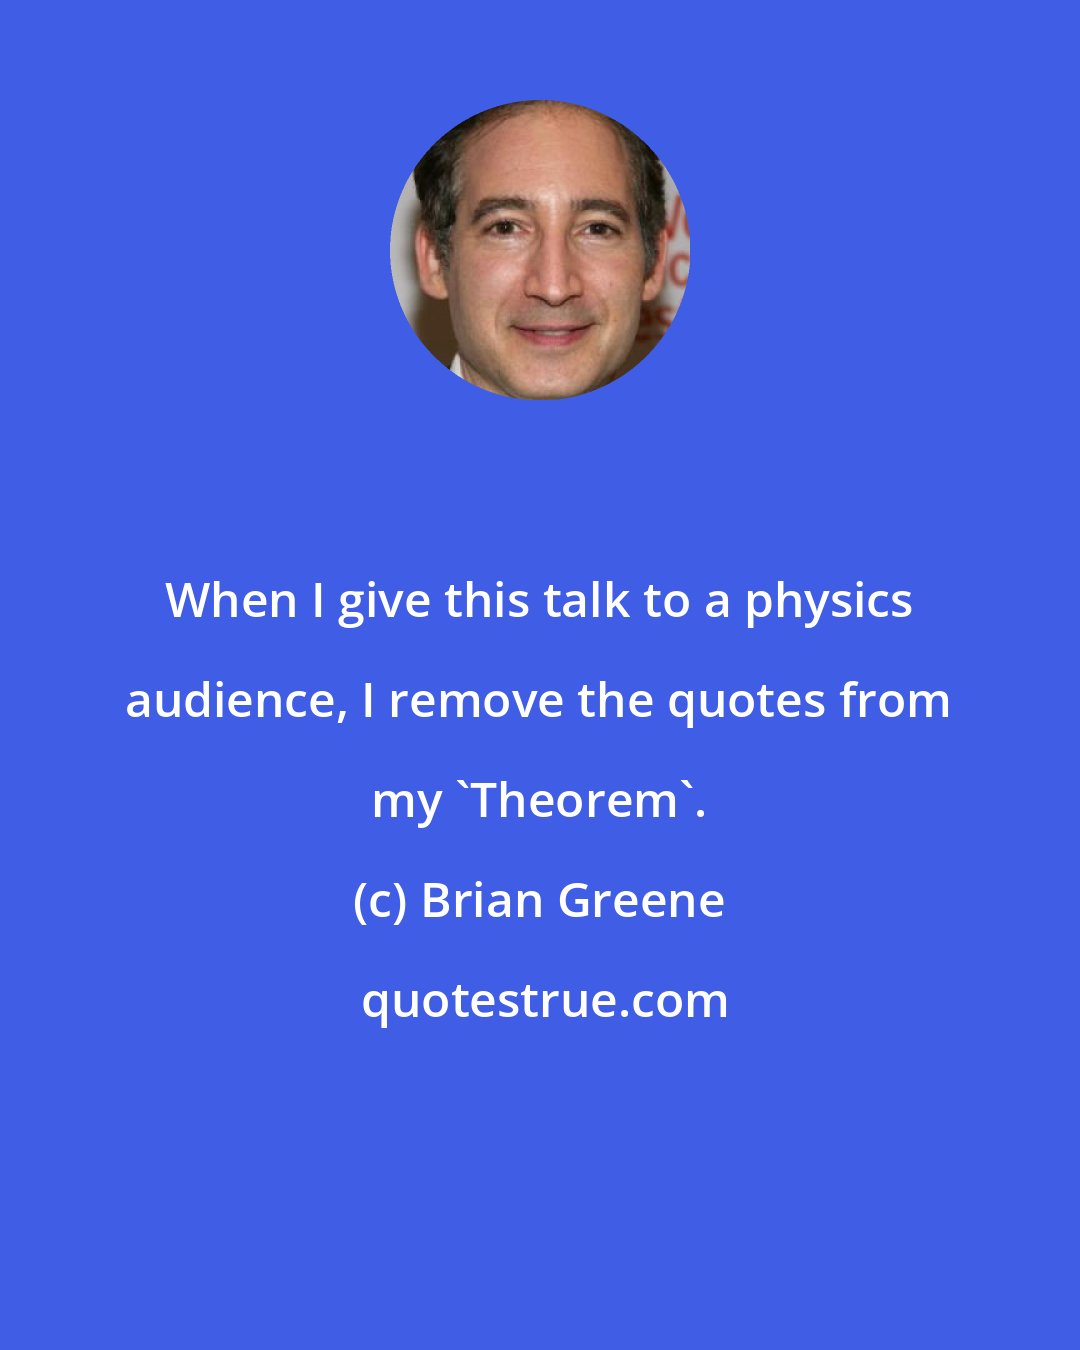 Brian Greene: When I give this talk to a physics audience, I remove the quotes from my 'Theorem'.